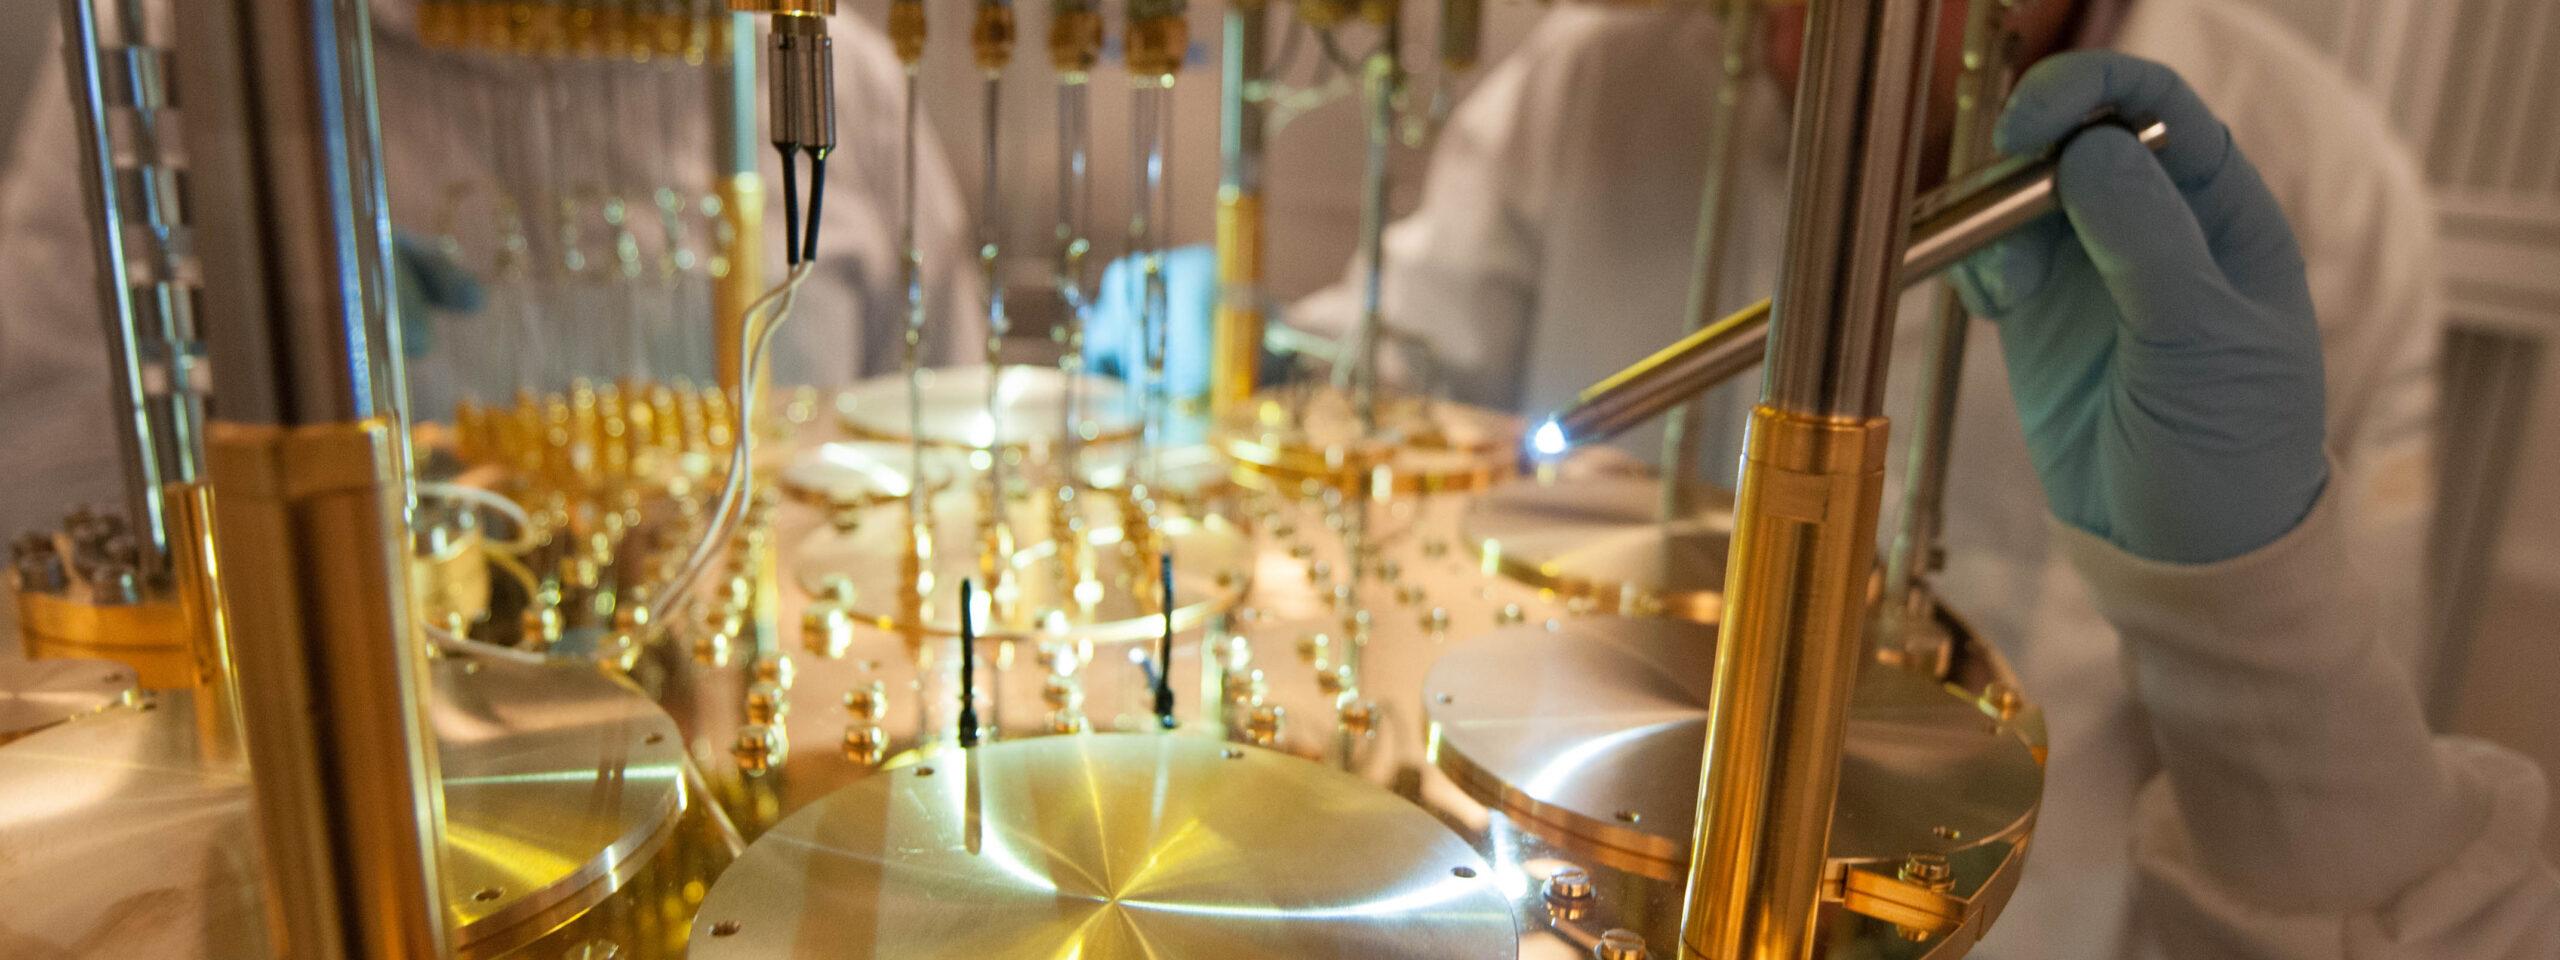 A photo of a scientist working on a quantum computer, showing the research and development that is taking place in this field.